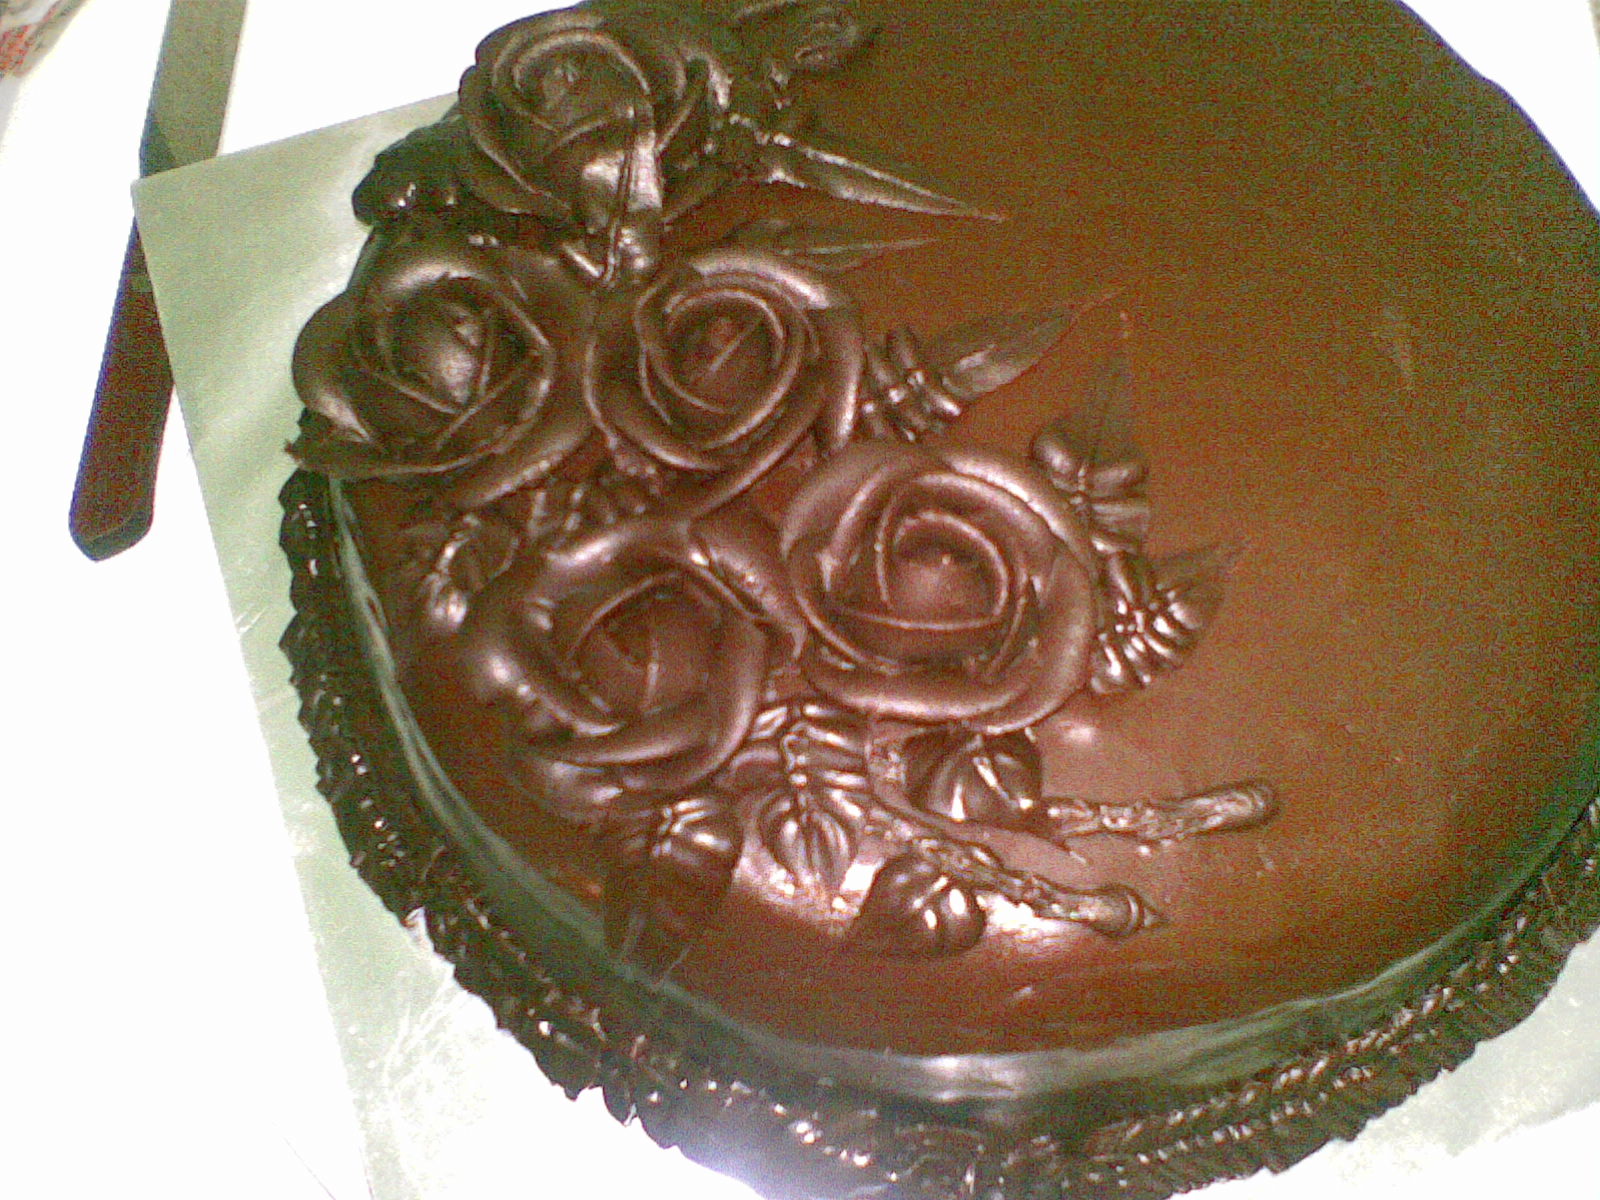 From Bakery 2 Embroidery Black White Hot Chocolate Cake